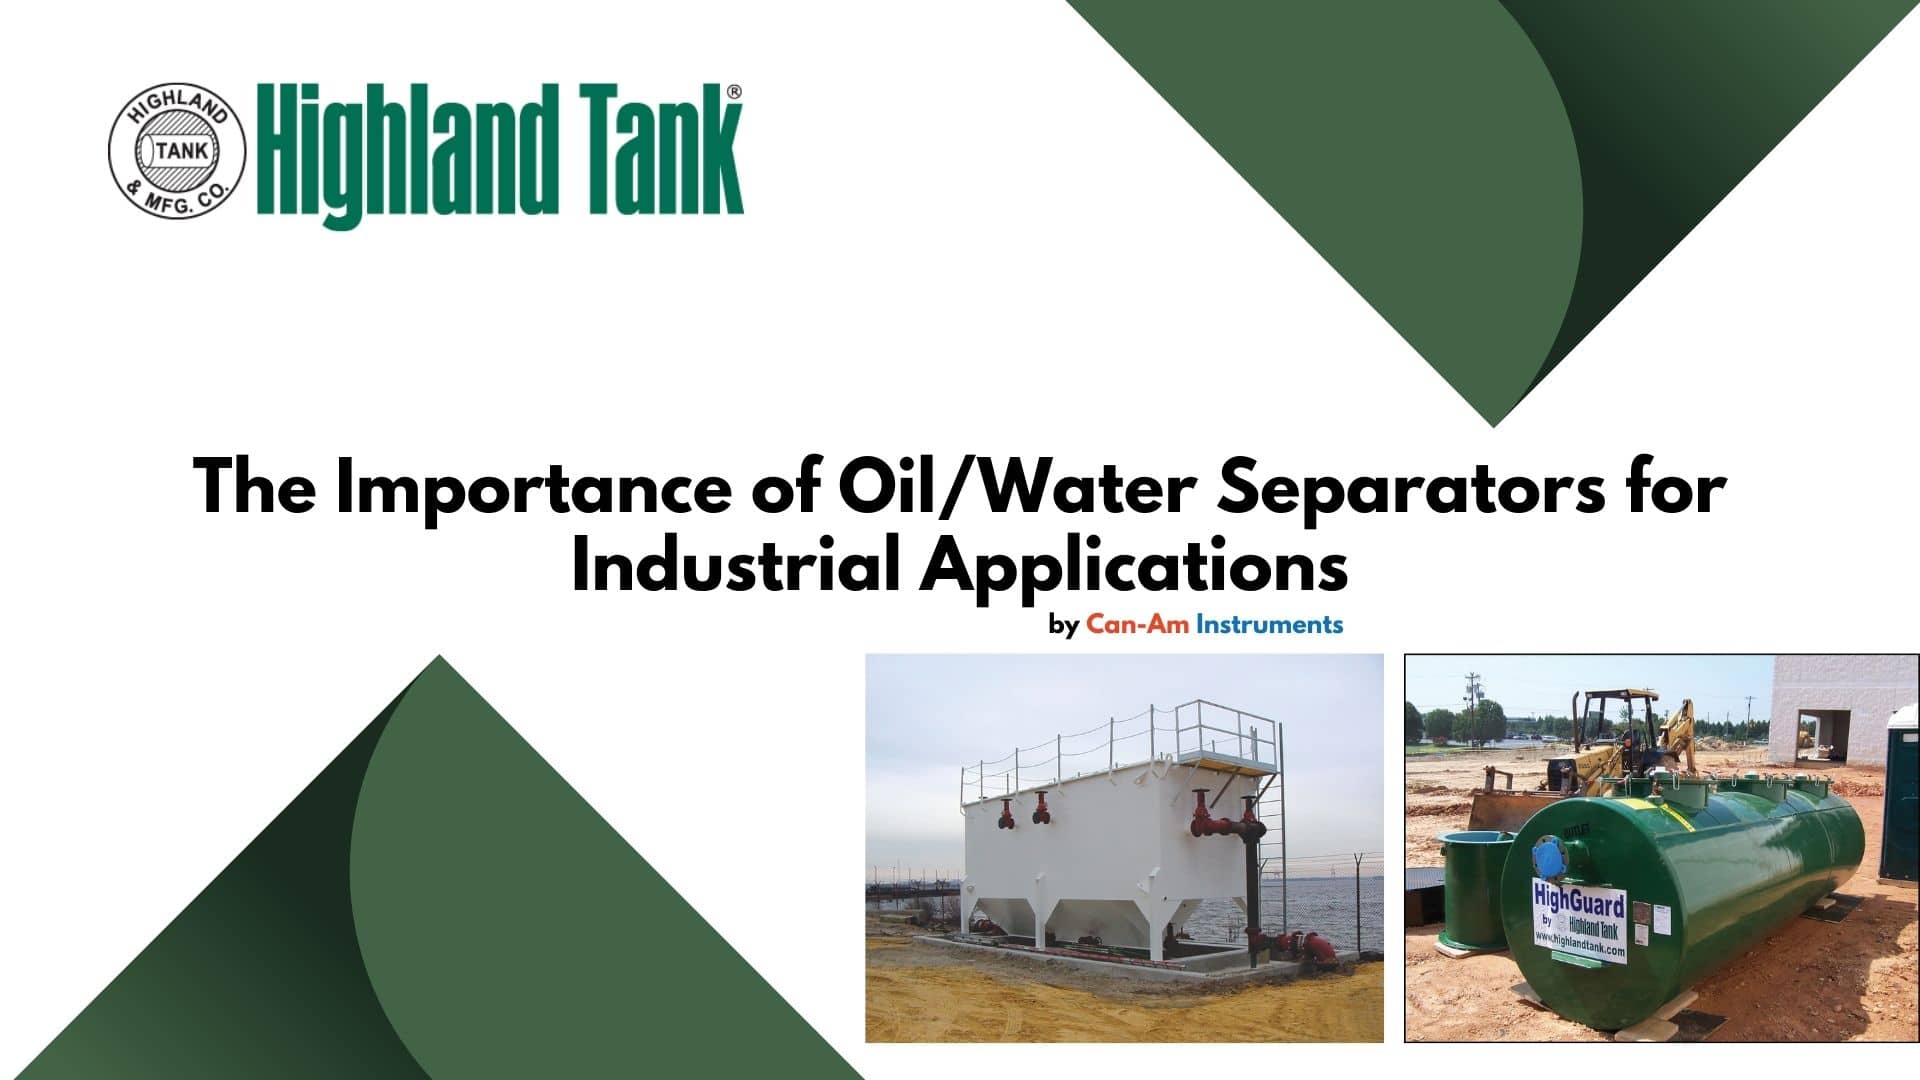 The Importance and Variety of Highland Tank’s Oil/Water Separators in Industrial Applications Image